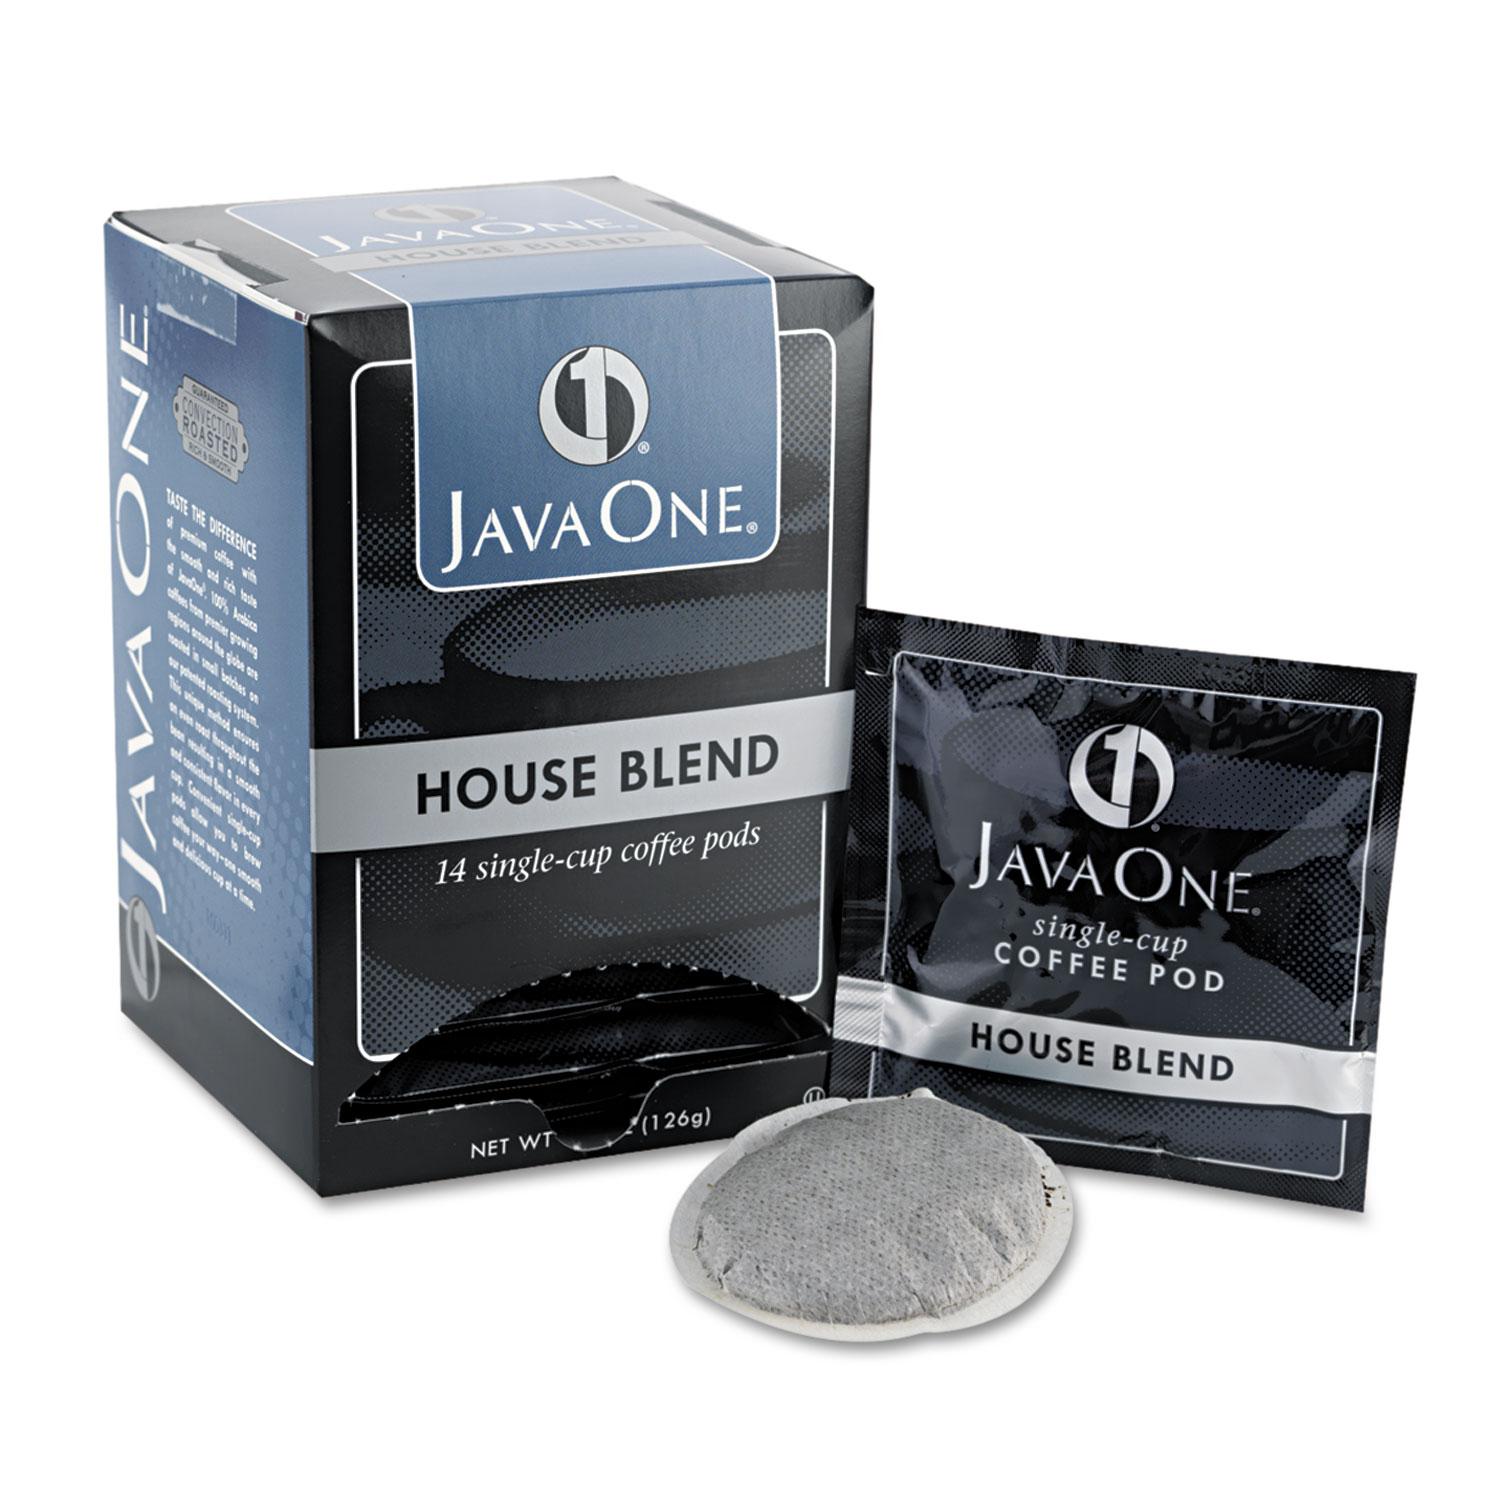  Java One 39840306141 Coffee Pods, House Blend, Single Cup, 14/Box (JAV40300) 